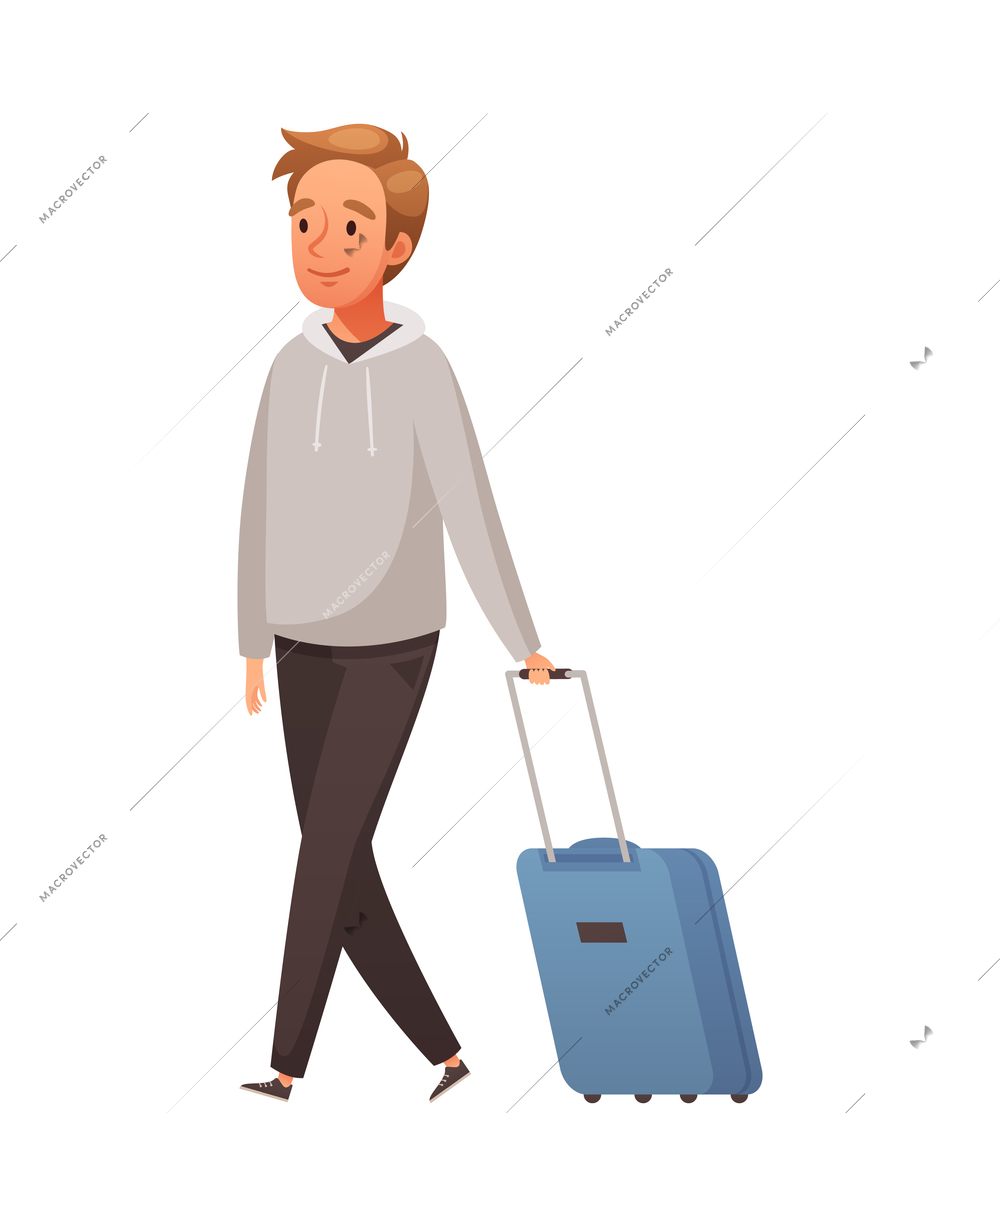 Aircraft plane airport staff people cartoon composition with isolated human character of passenger with suitcase vector illustration